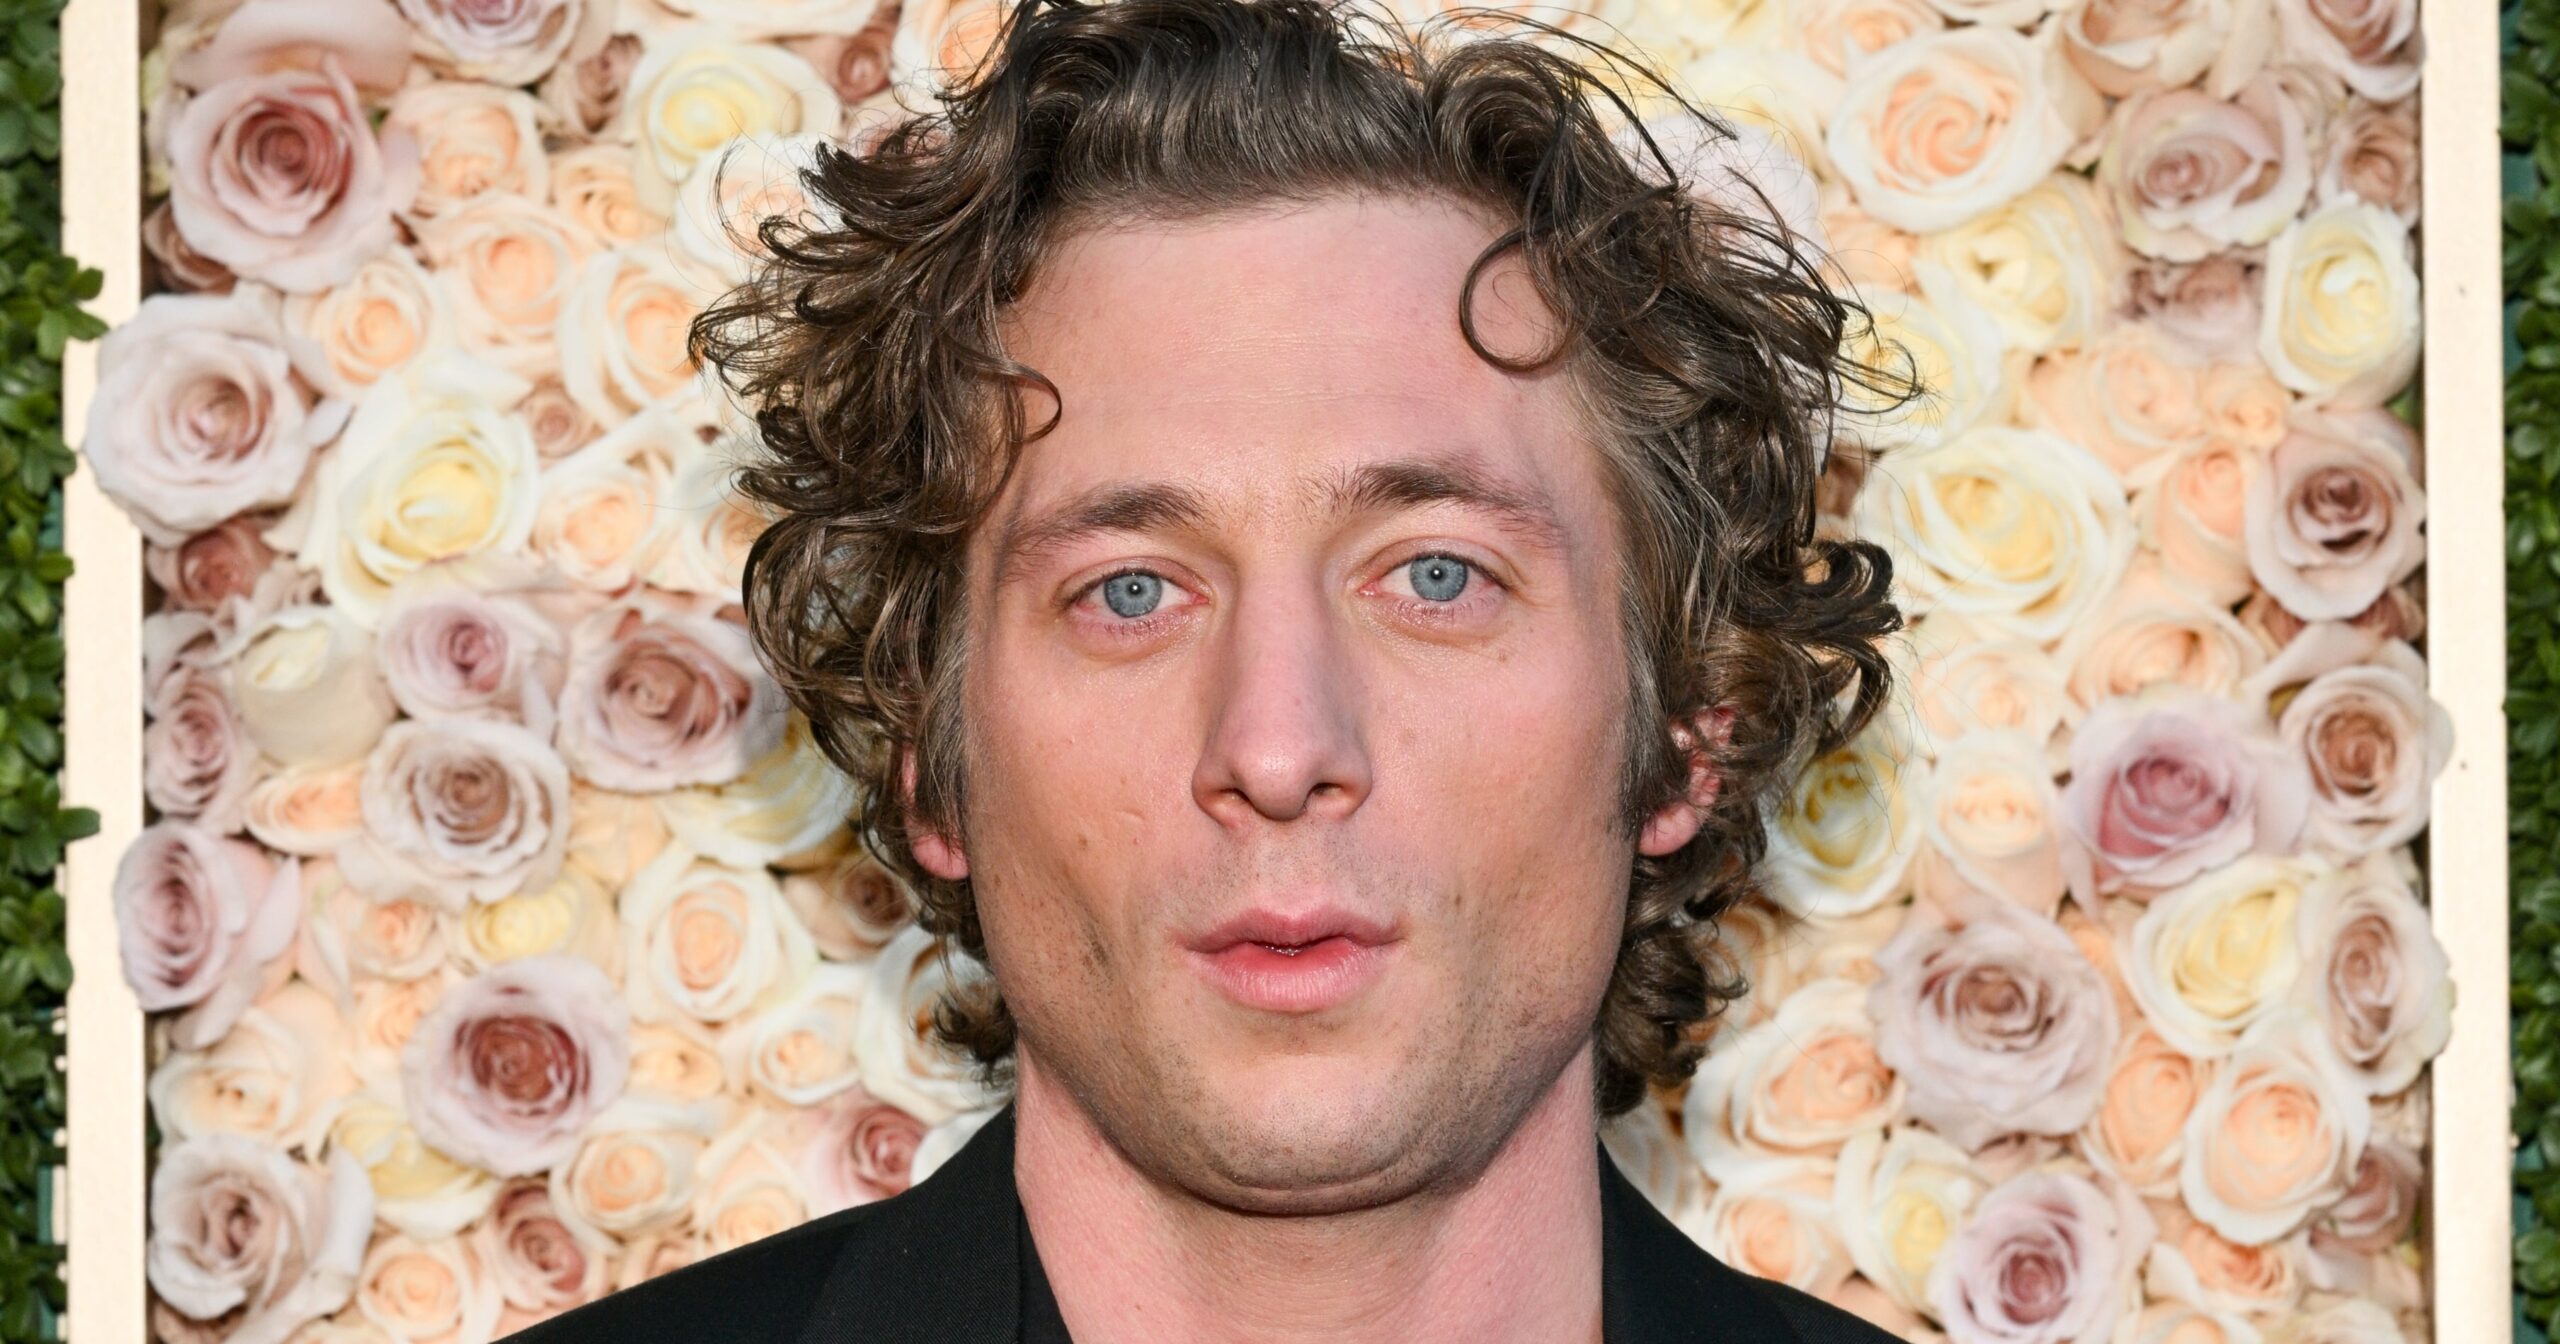 Jeremy Allen White’s Tattoos Give You a Ogle at His Softer Aspect